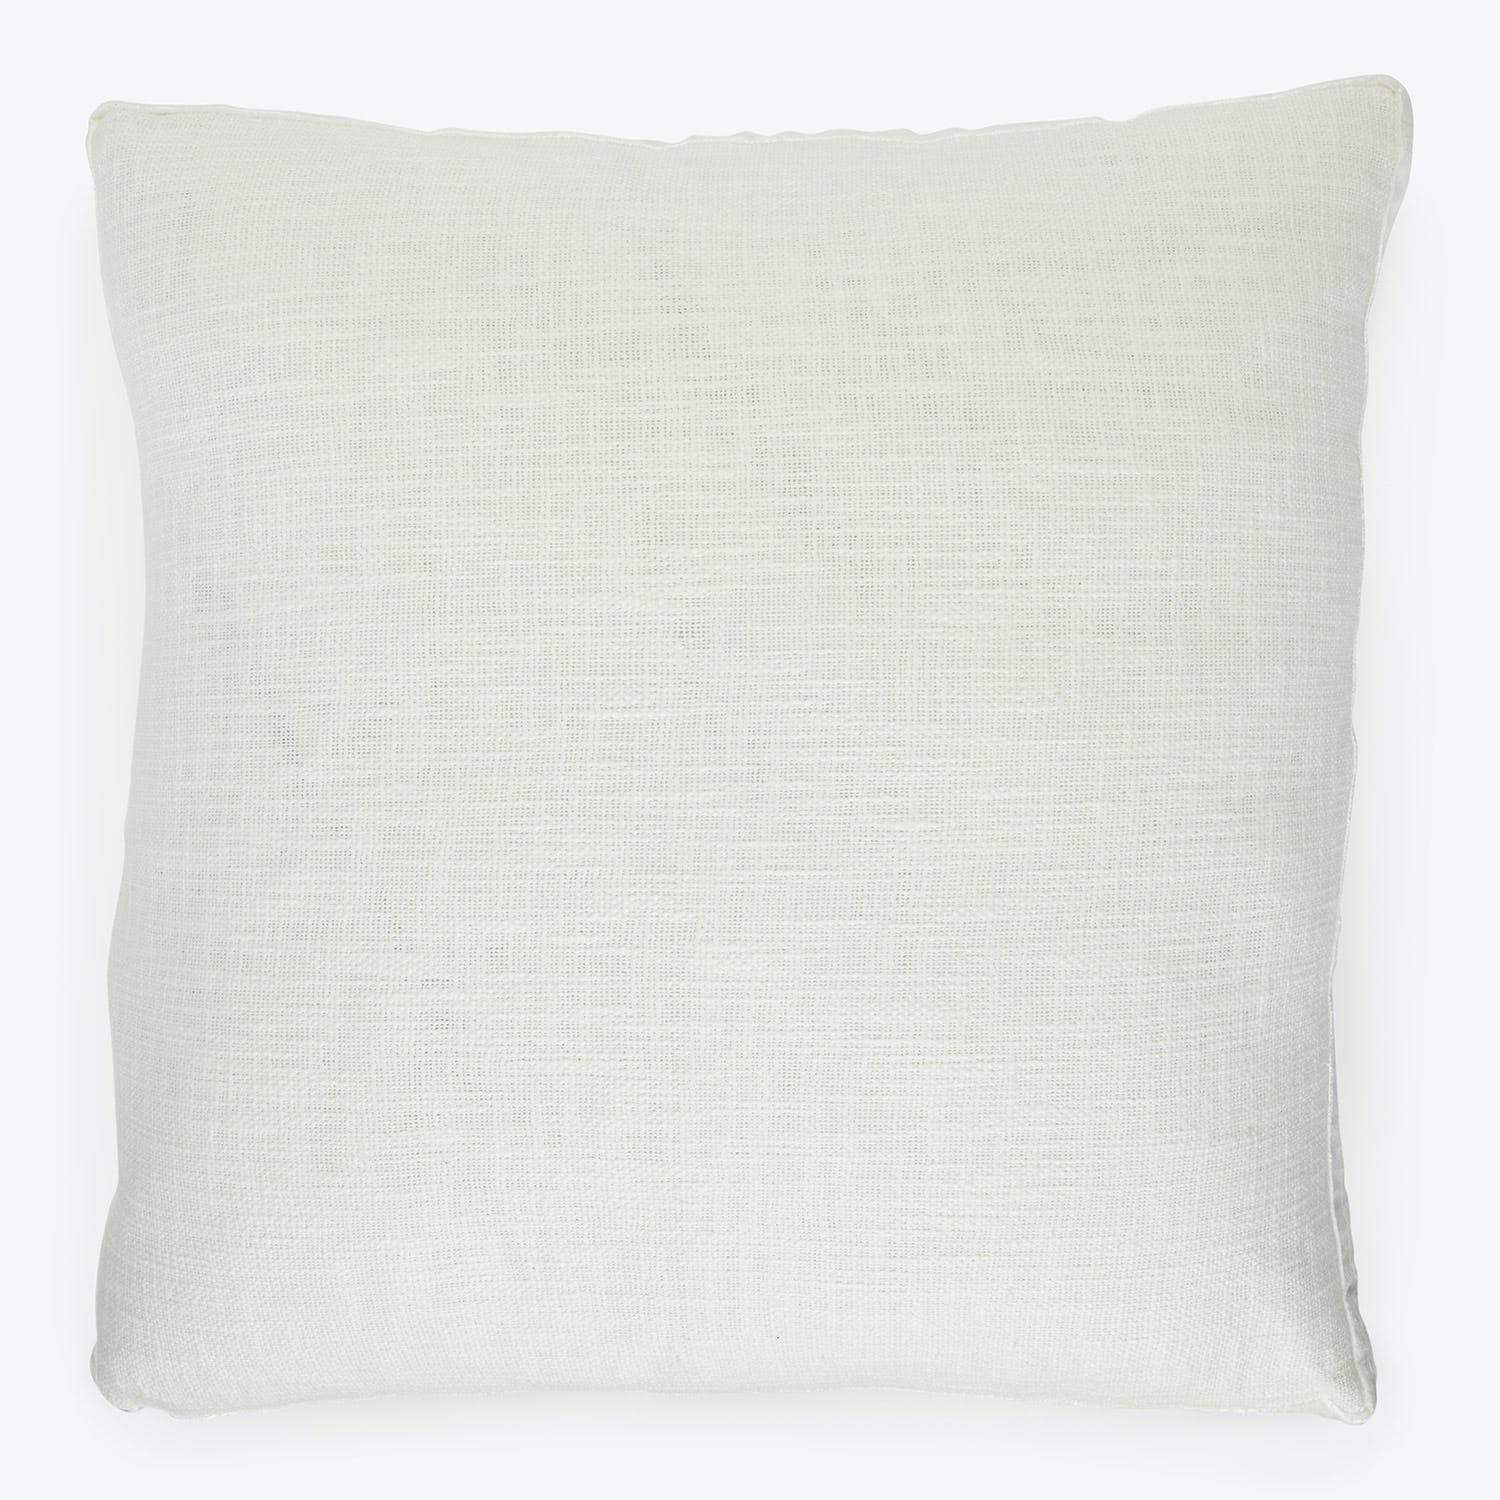 Square pillow with a soft, linen-like fabric cover.